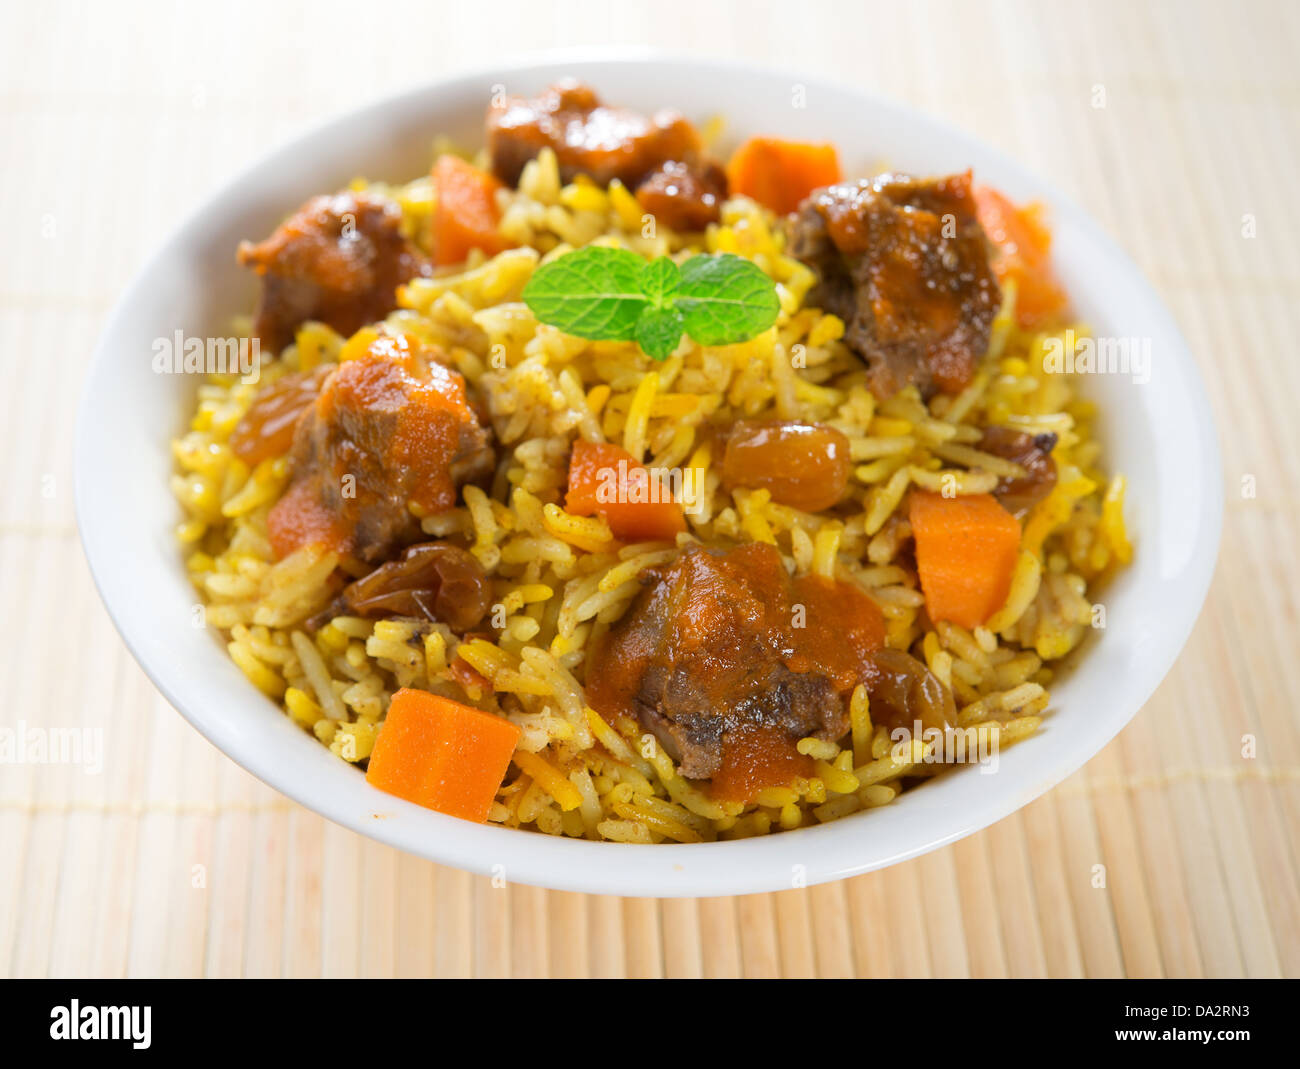 Arab food. Mutton With Rice. Middle eastern cuisine. Stock Photo